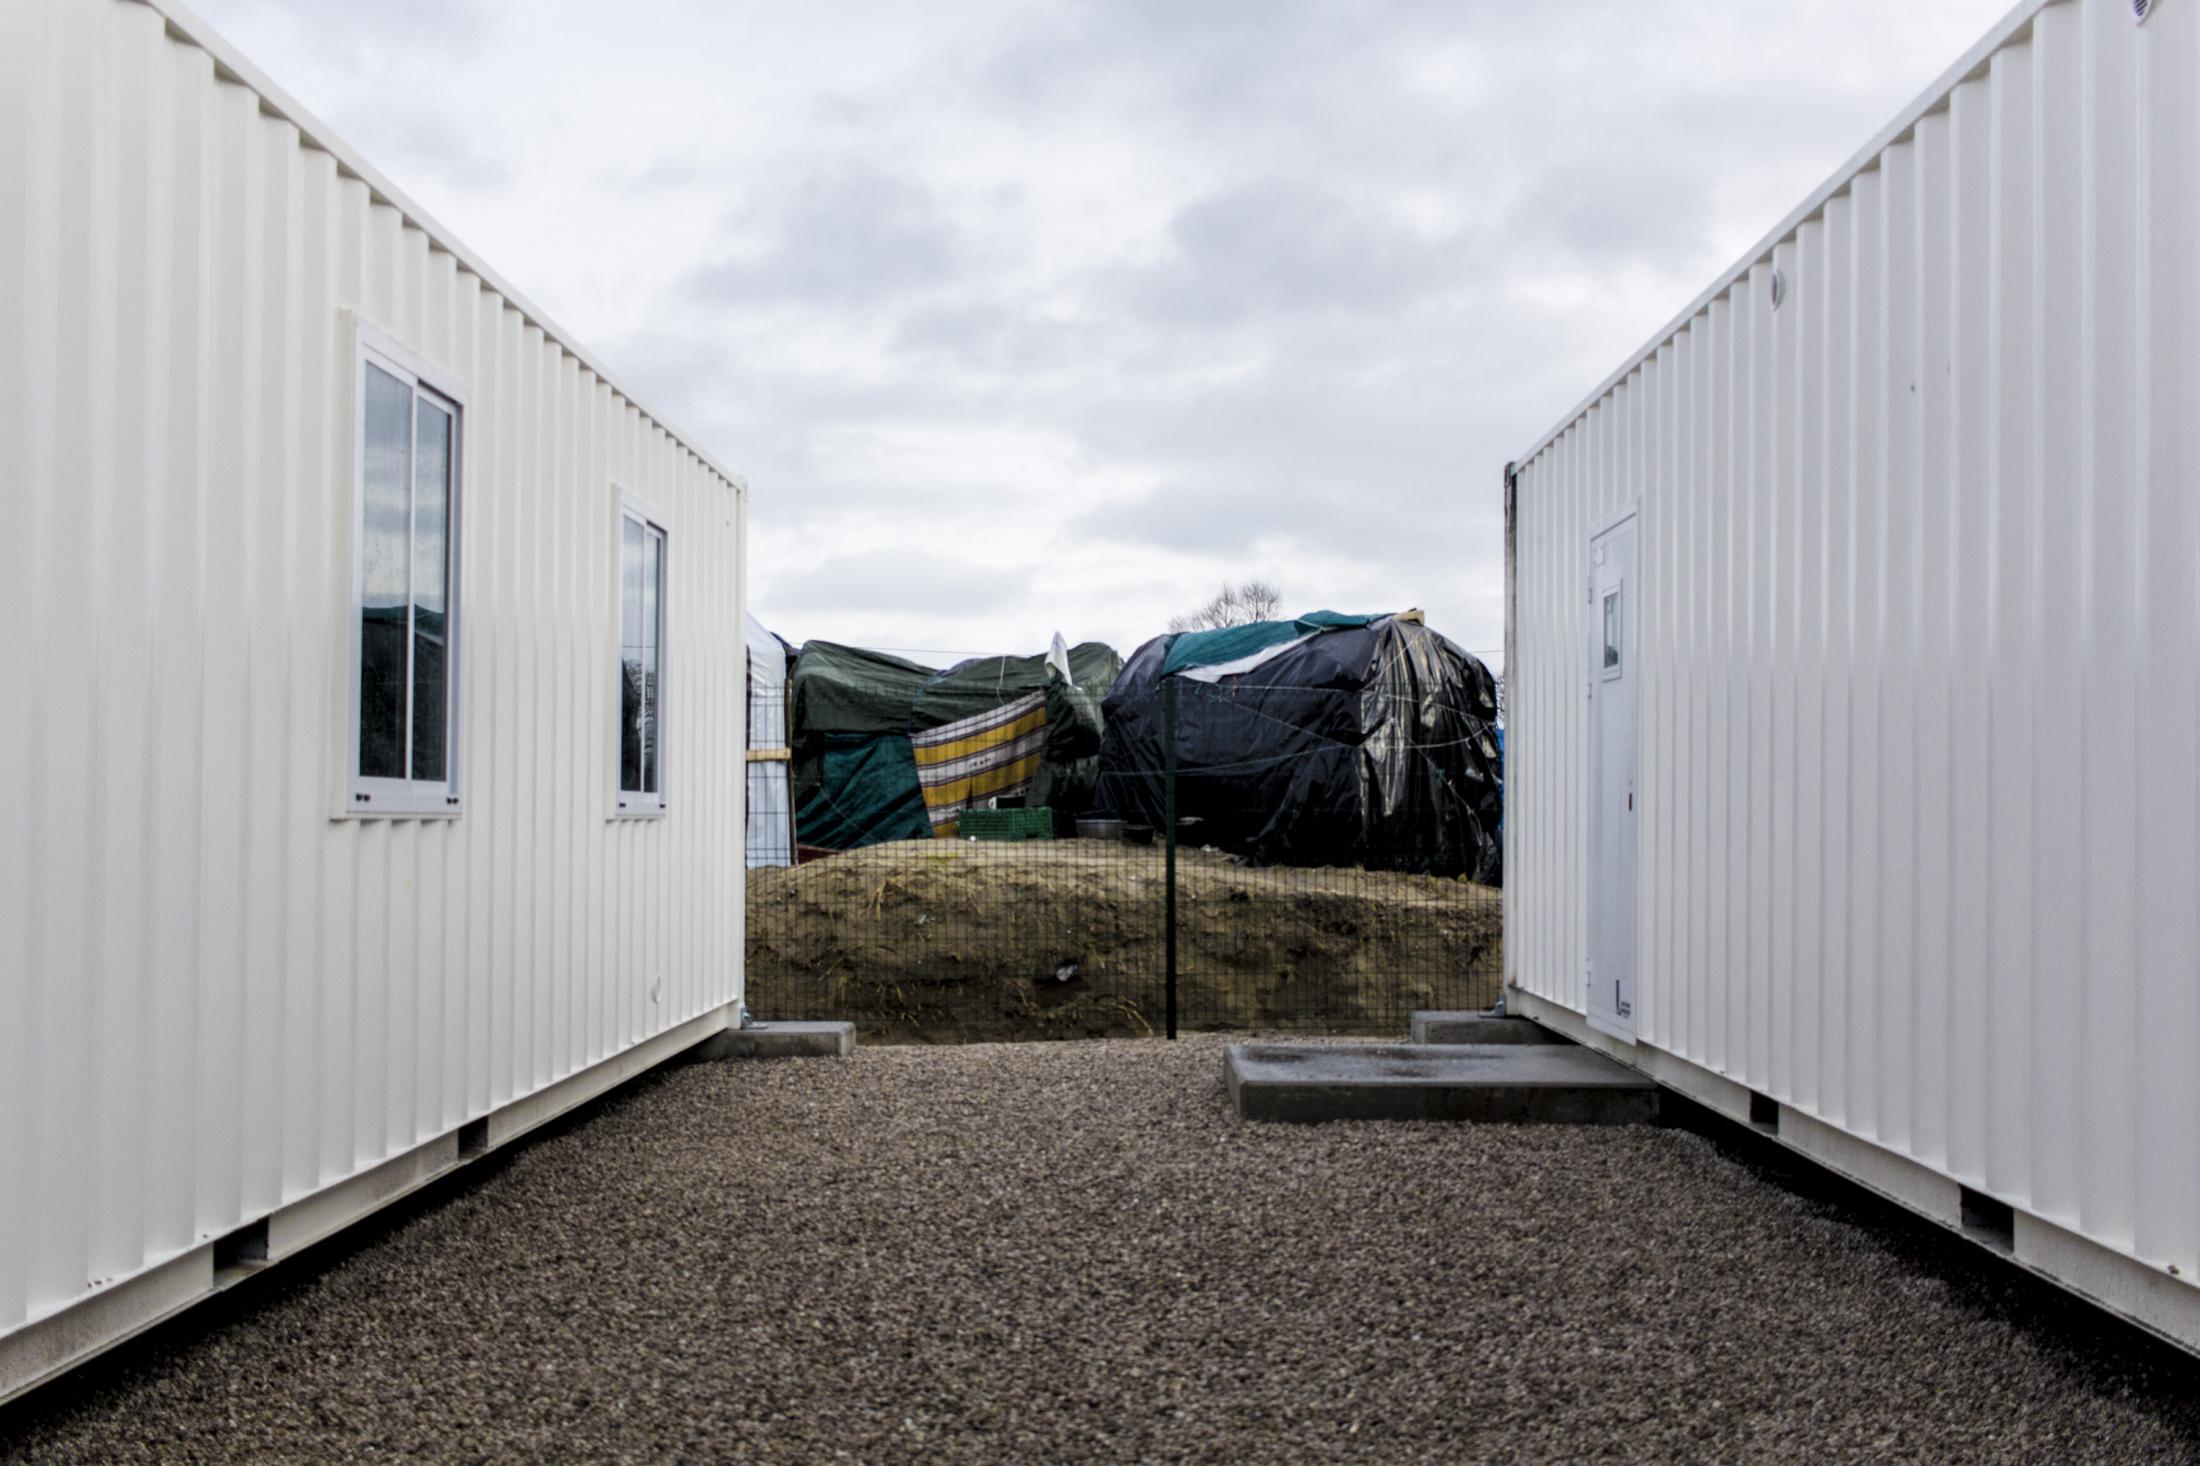 Latent urbanities - View of the New Jungle from the official containers camp built by the french gobernement in the...